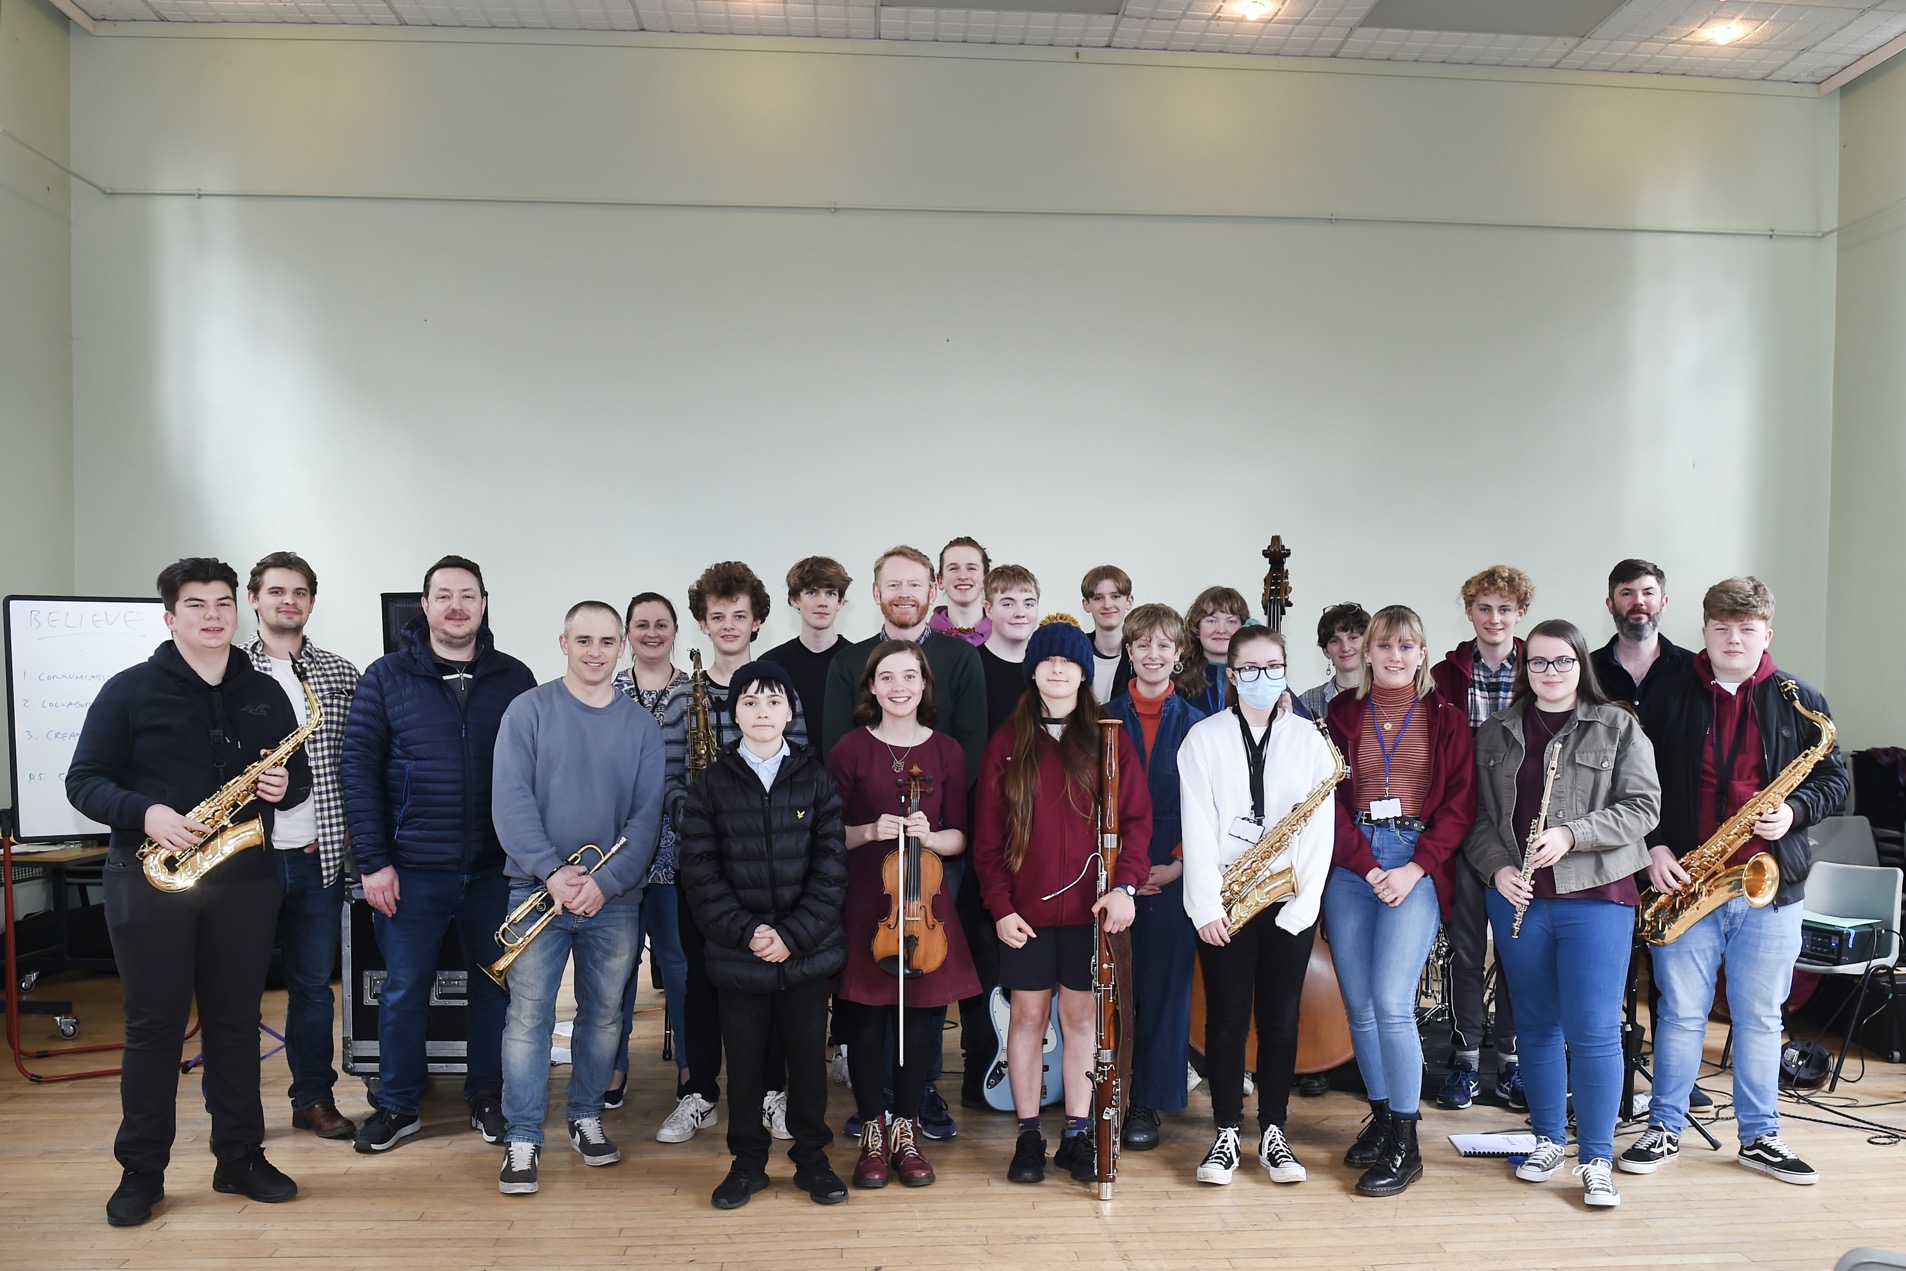 Jazz musicians and tutors posing for a group photograph